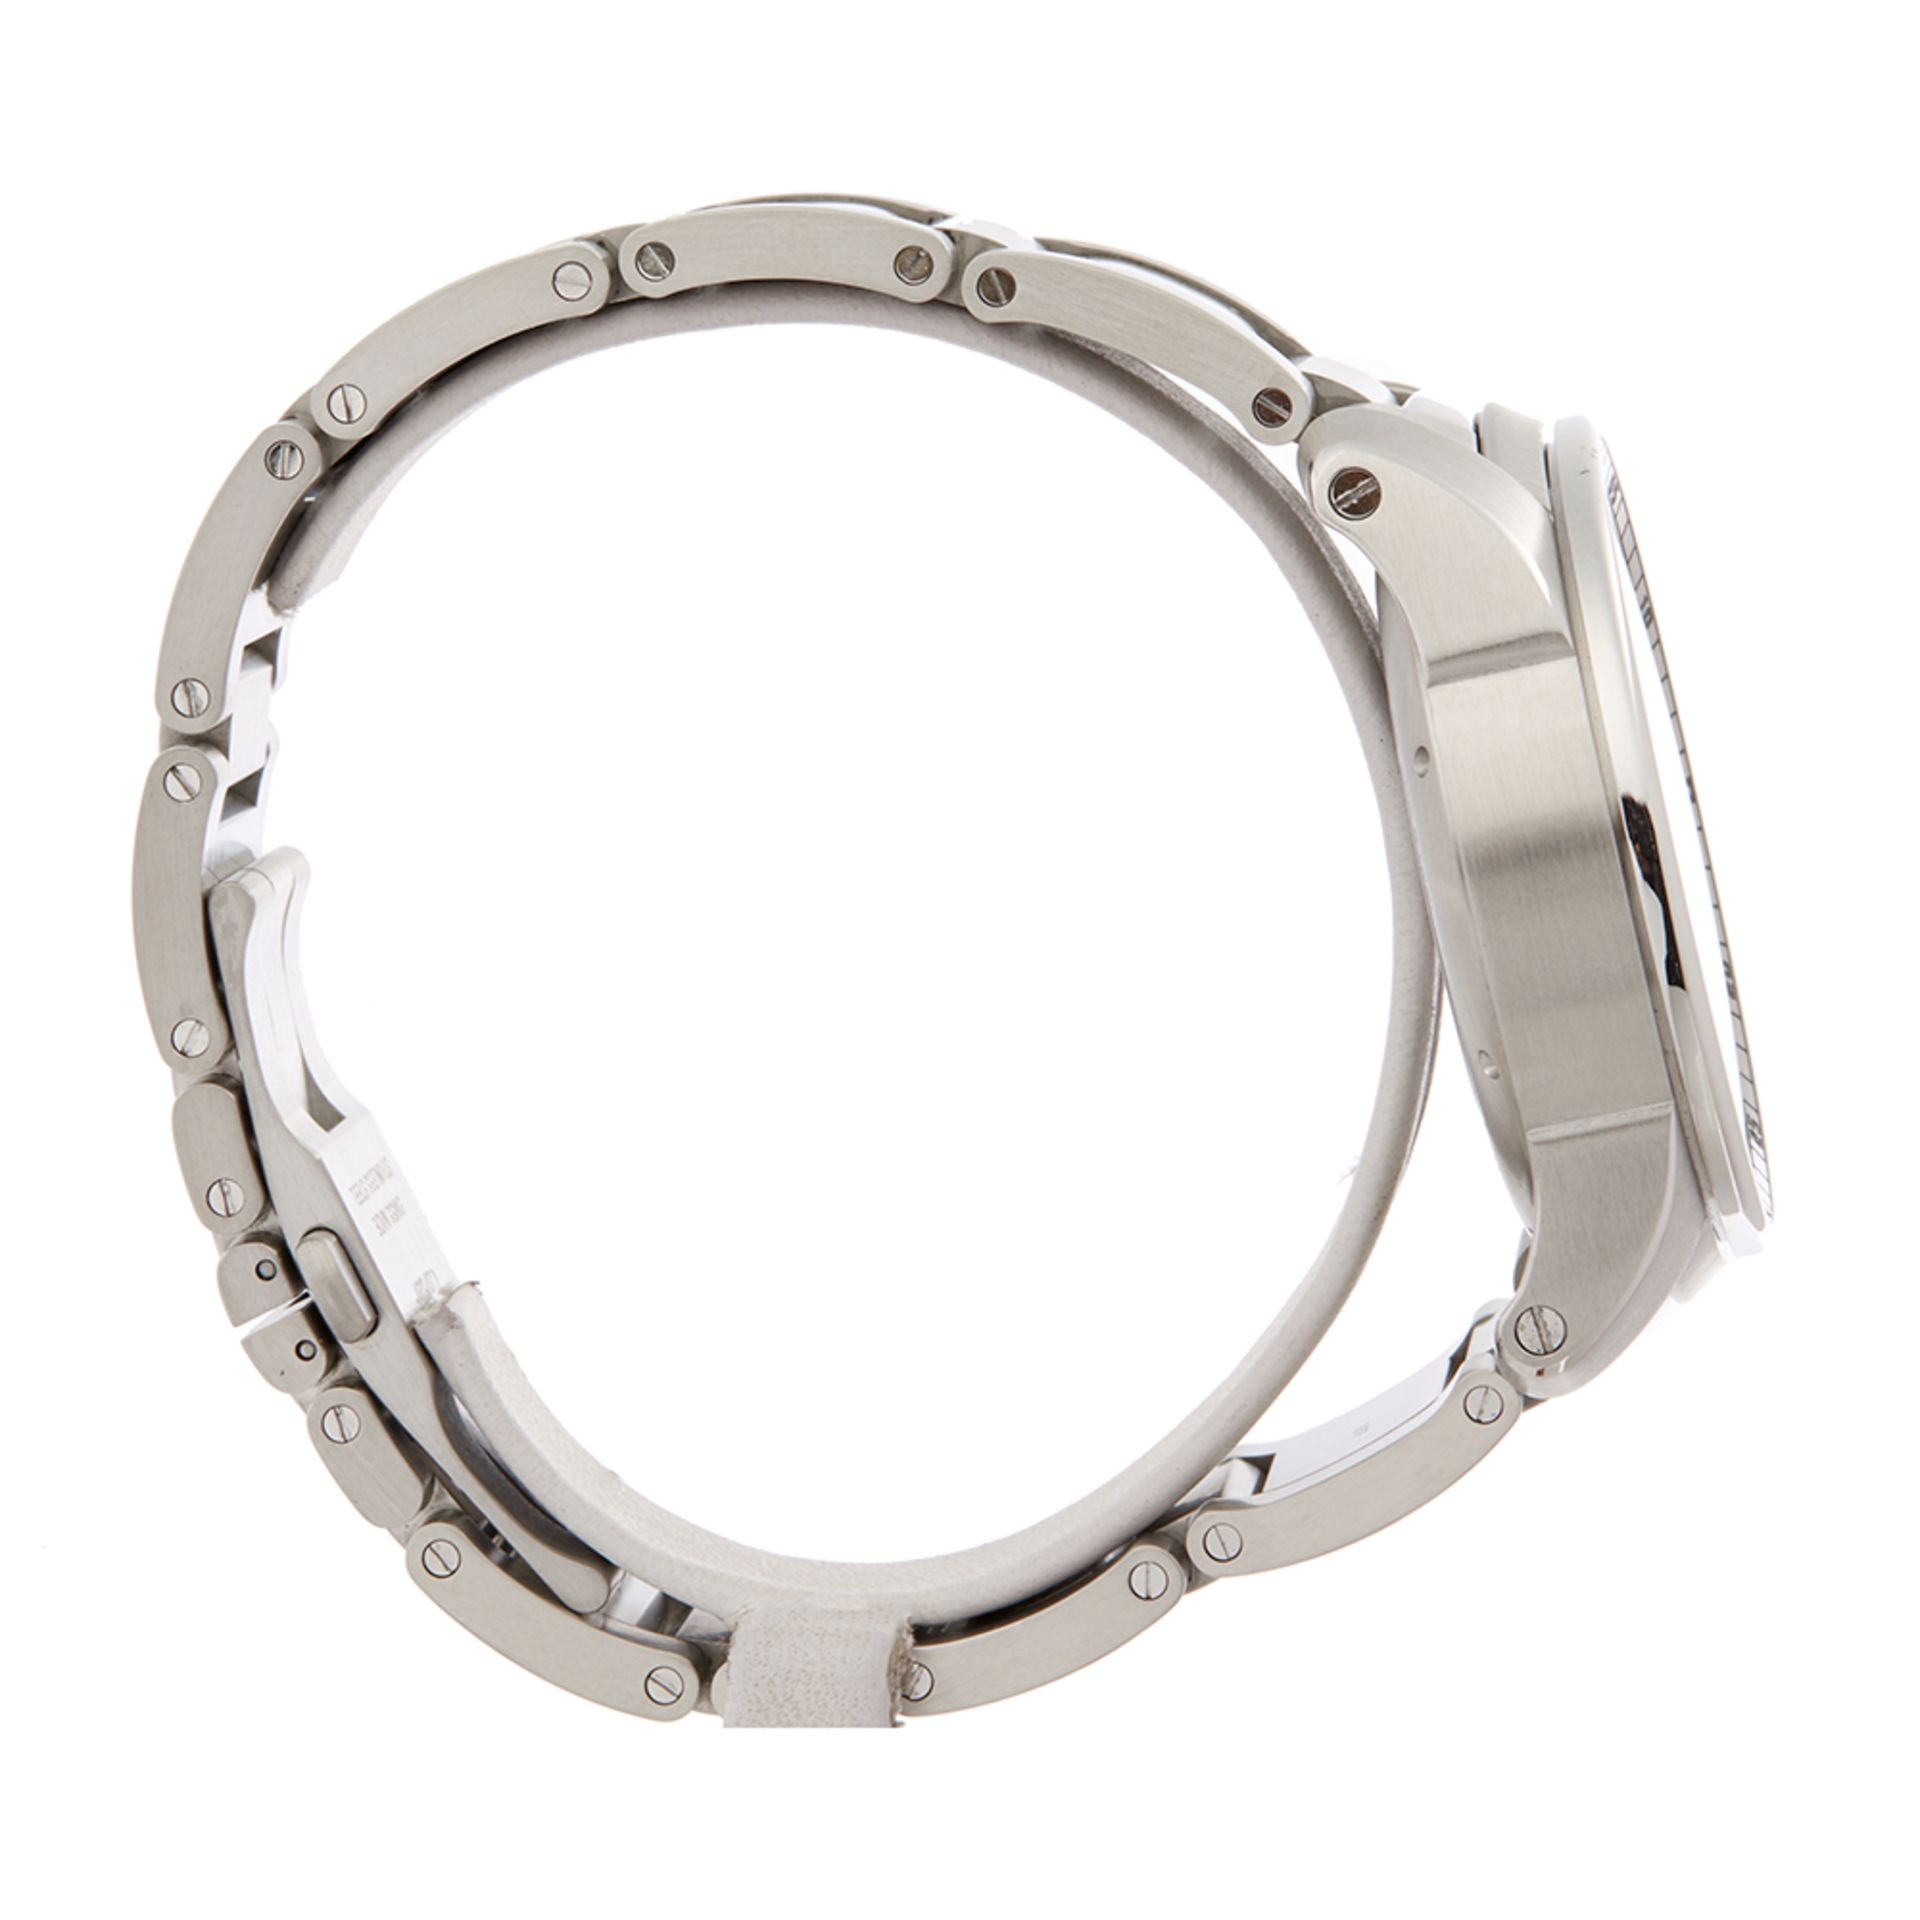 Cartier Calibre Stainless Steel - W7100061 - Image 2 of 6